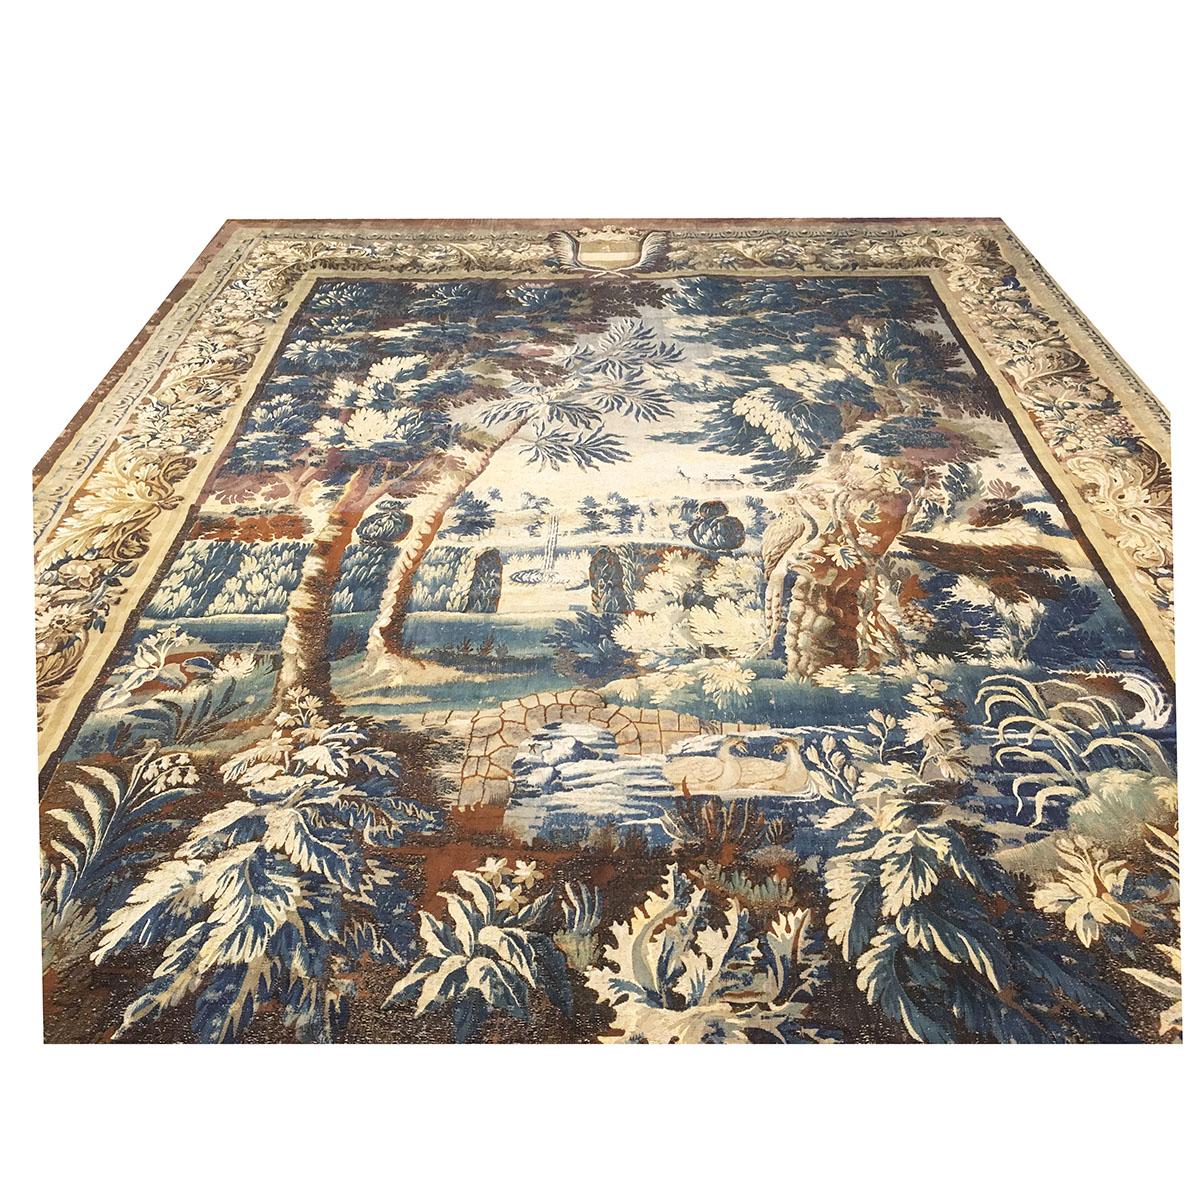 Ashly Fine Rugs Presents AN ENGLISH BAROQUE GARDEN LANDSCAPE TAPESTRY, ROYAL MORTLAKE WORKSHOP, 17TH CENTURY, woven with silk and wool in a rectangular form centering a stone footbridge over a meandering stream with paired geese amidst a garden of